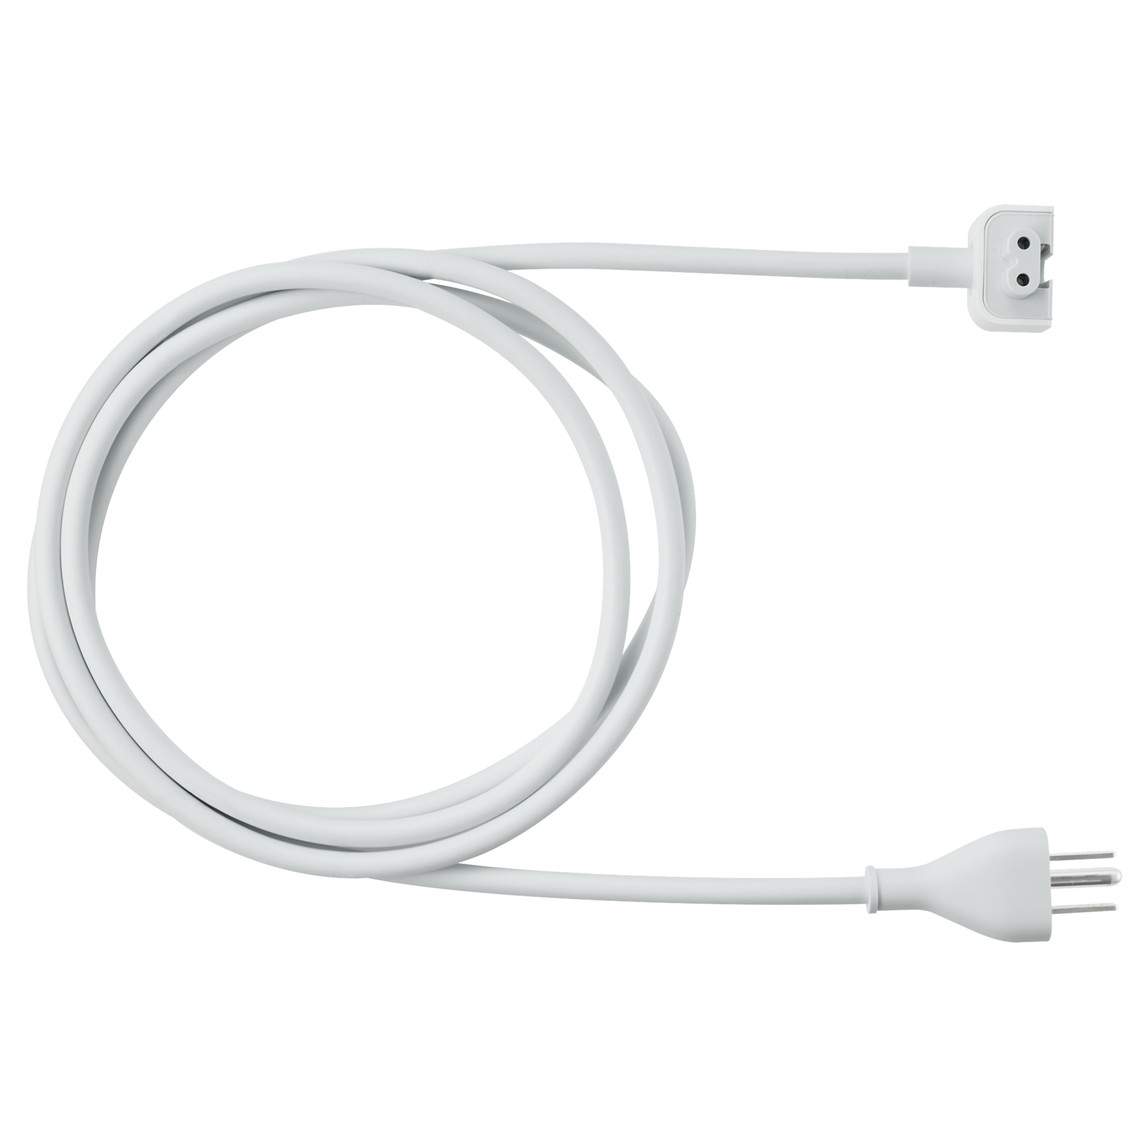 Picture of Apple Power Adapter Extension Cable